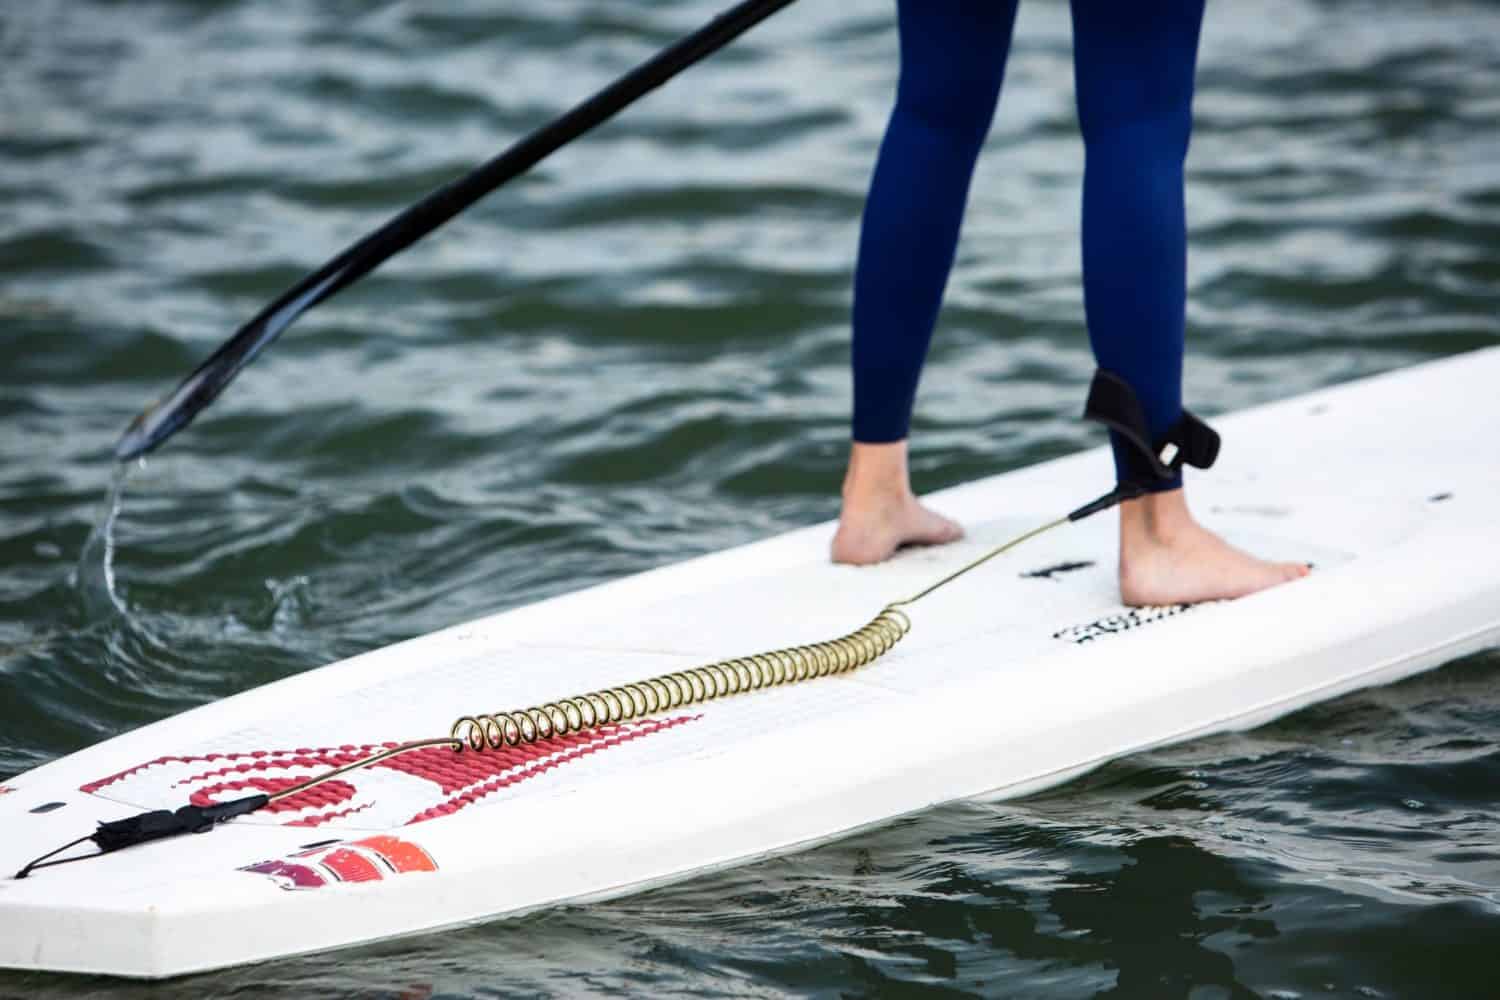 Close up picture of persons feet on a paddle board. White paddle board, black paddle, and navy blue dry suit in Clipper Cove.